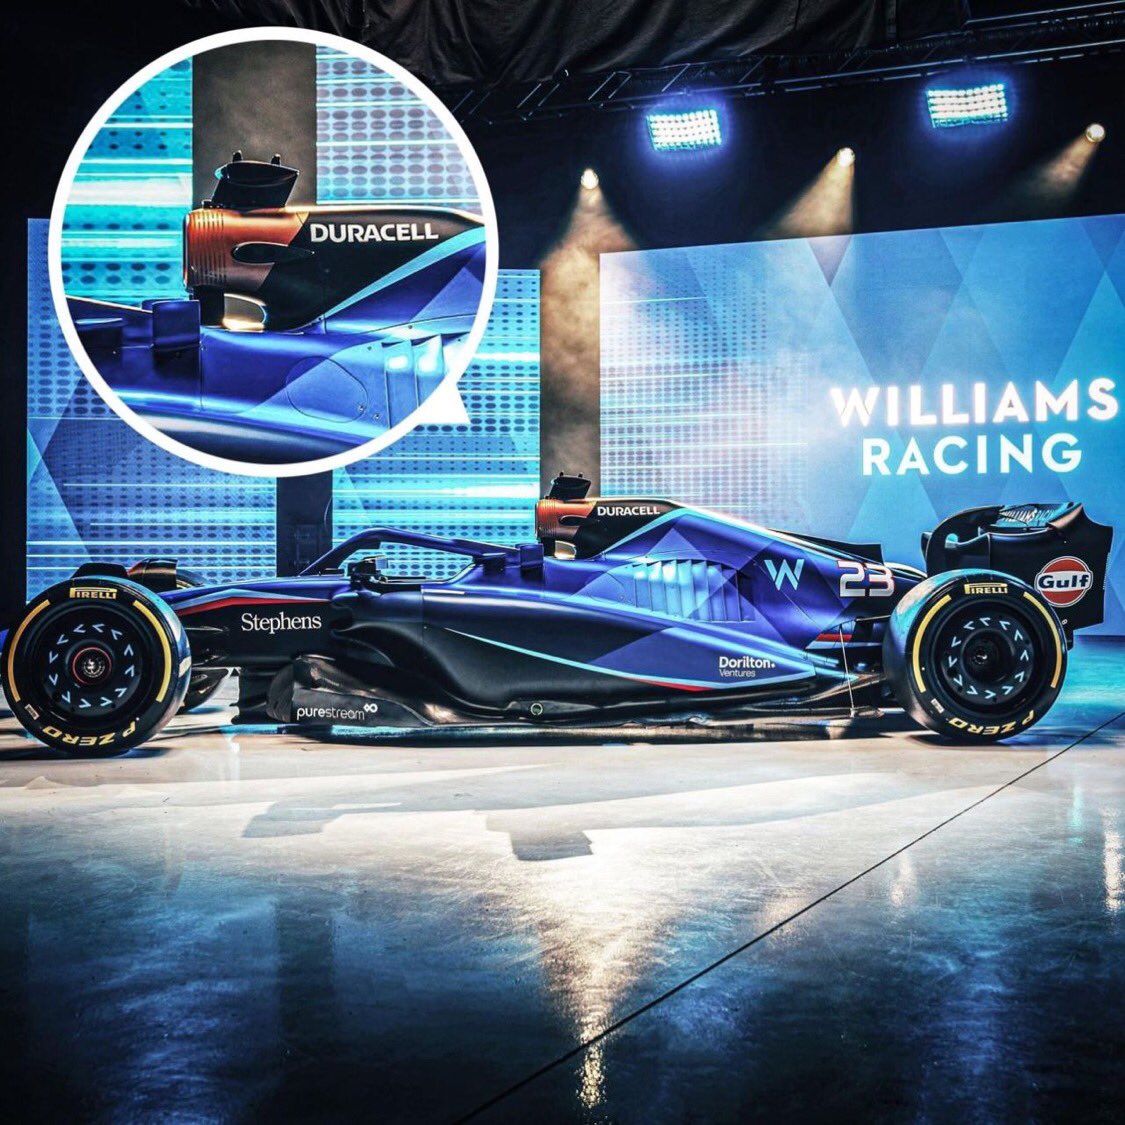 ✨ What a brilliant idea from the 
#Duracell #Marketing Team.
How to sponsor a #Formula1 car in a best way. 🔋
Well done guys 👏 

#TeamWilliams #WilliamsRacing #LoganSargeant #AlexAlbon #Duracell #F12023